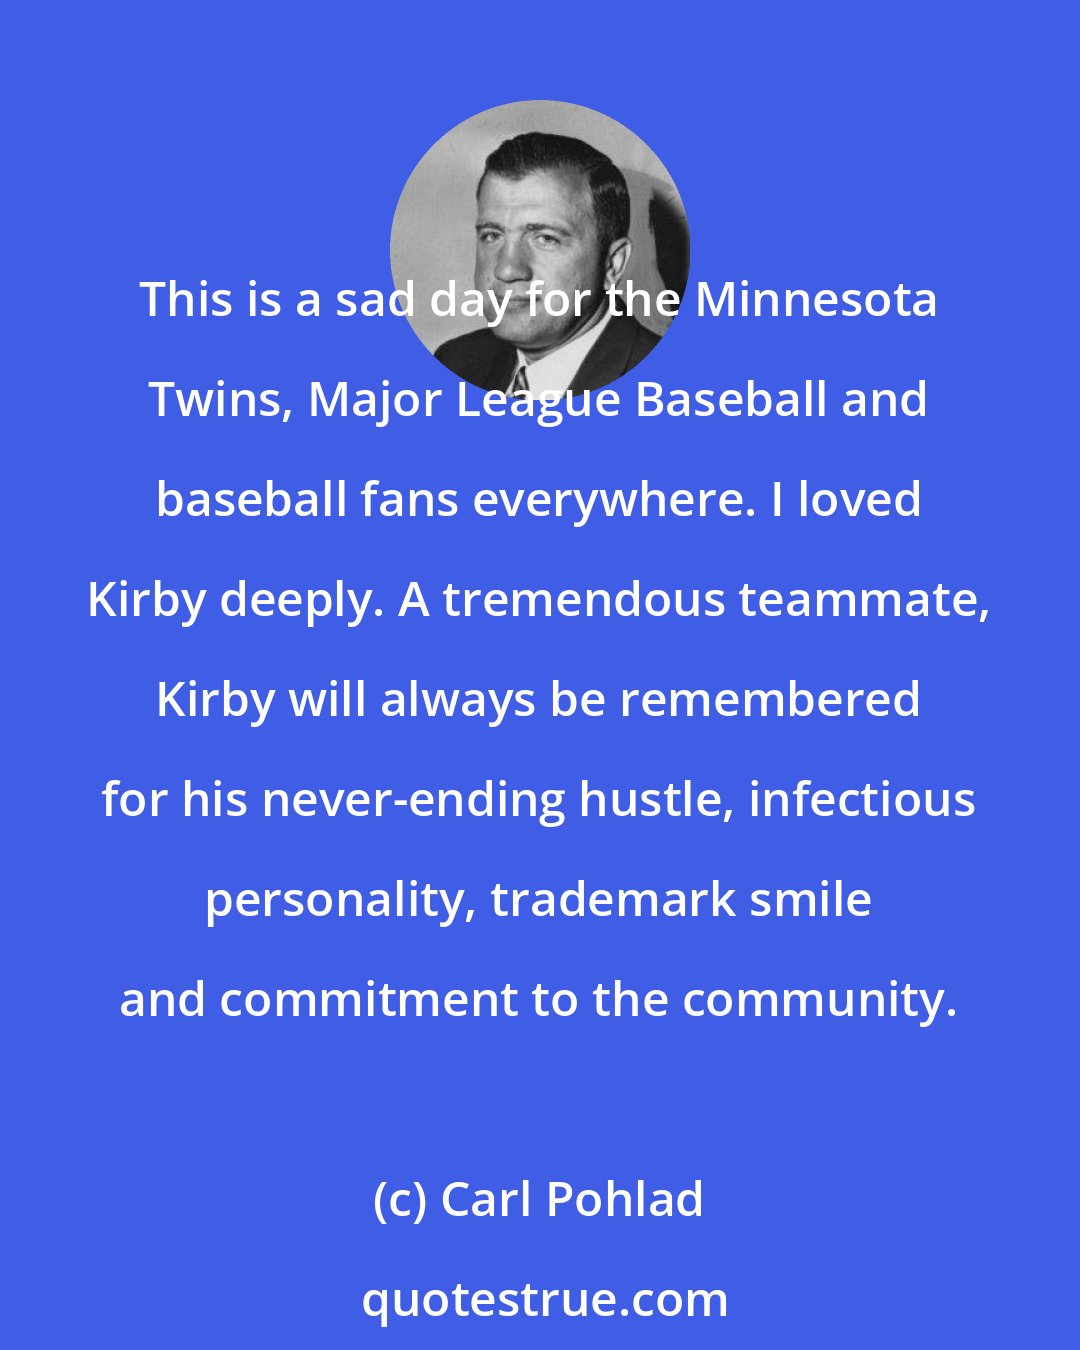 Carl Pohlad: This is a sad day for the Minnesota Twins, Major League Baseball and baseball fans everywhere. I loved Kirby deeply. A tremendous teammate, Kirby will always be remembered for his never-ending hustle, infectious personality, trademark smile and commitment to the community.